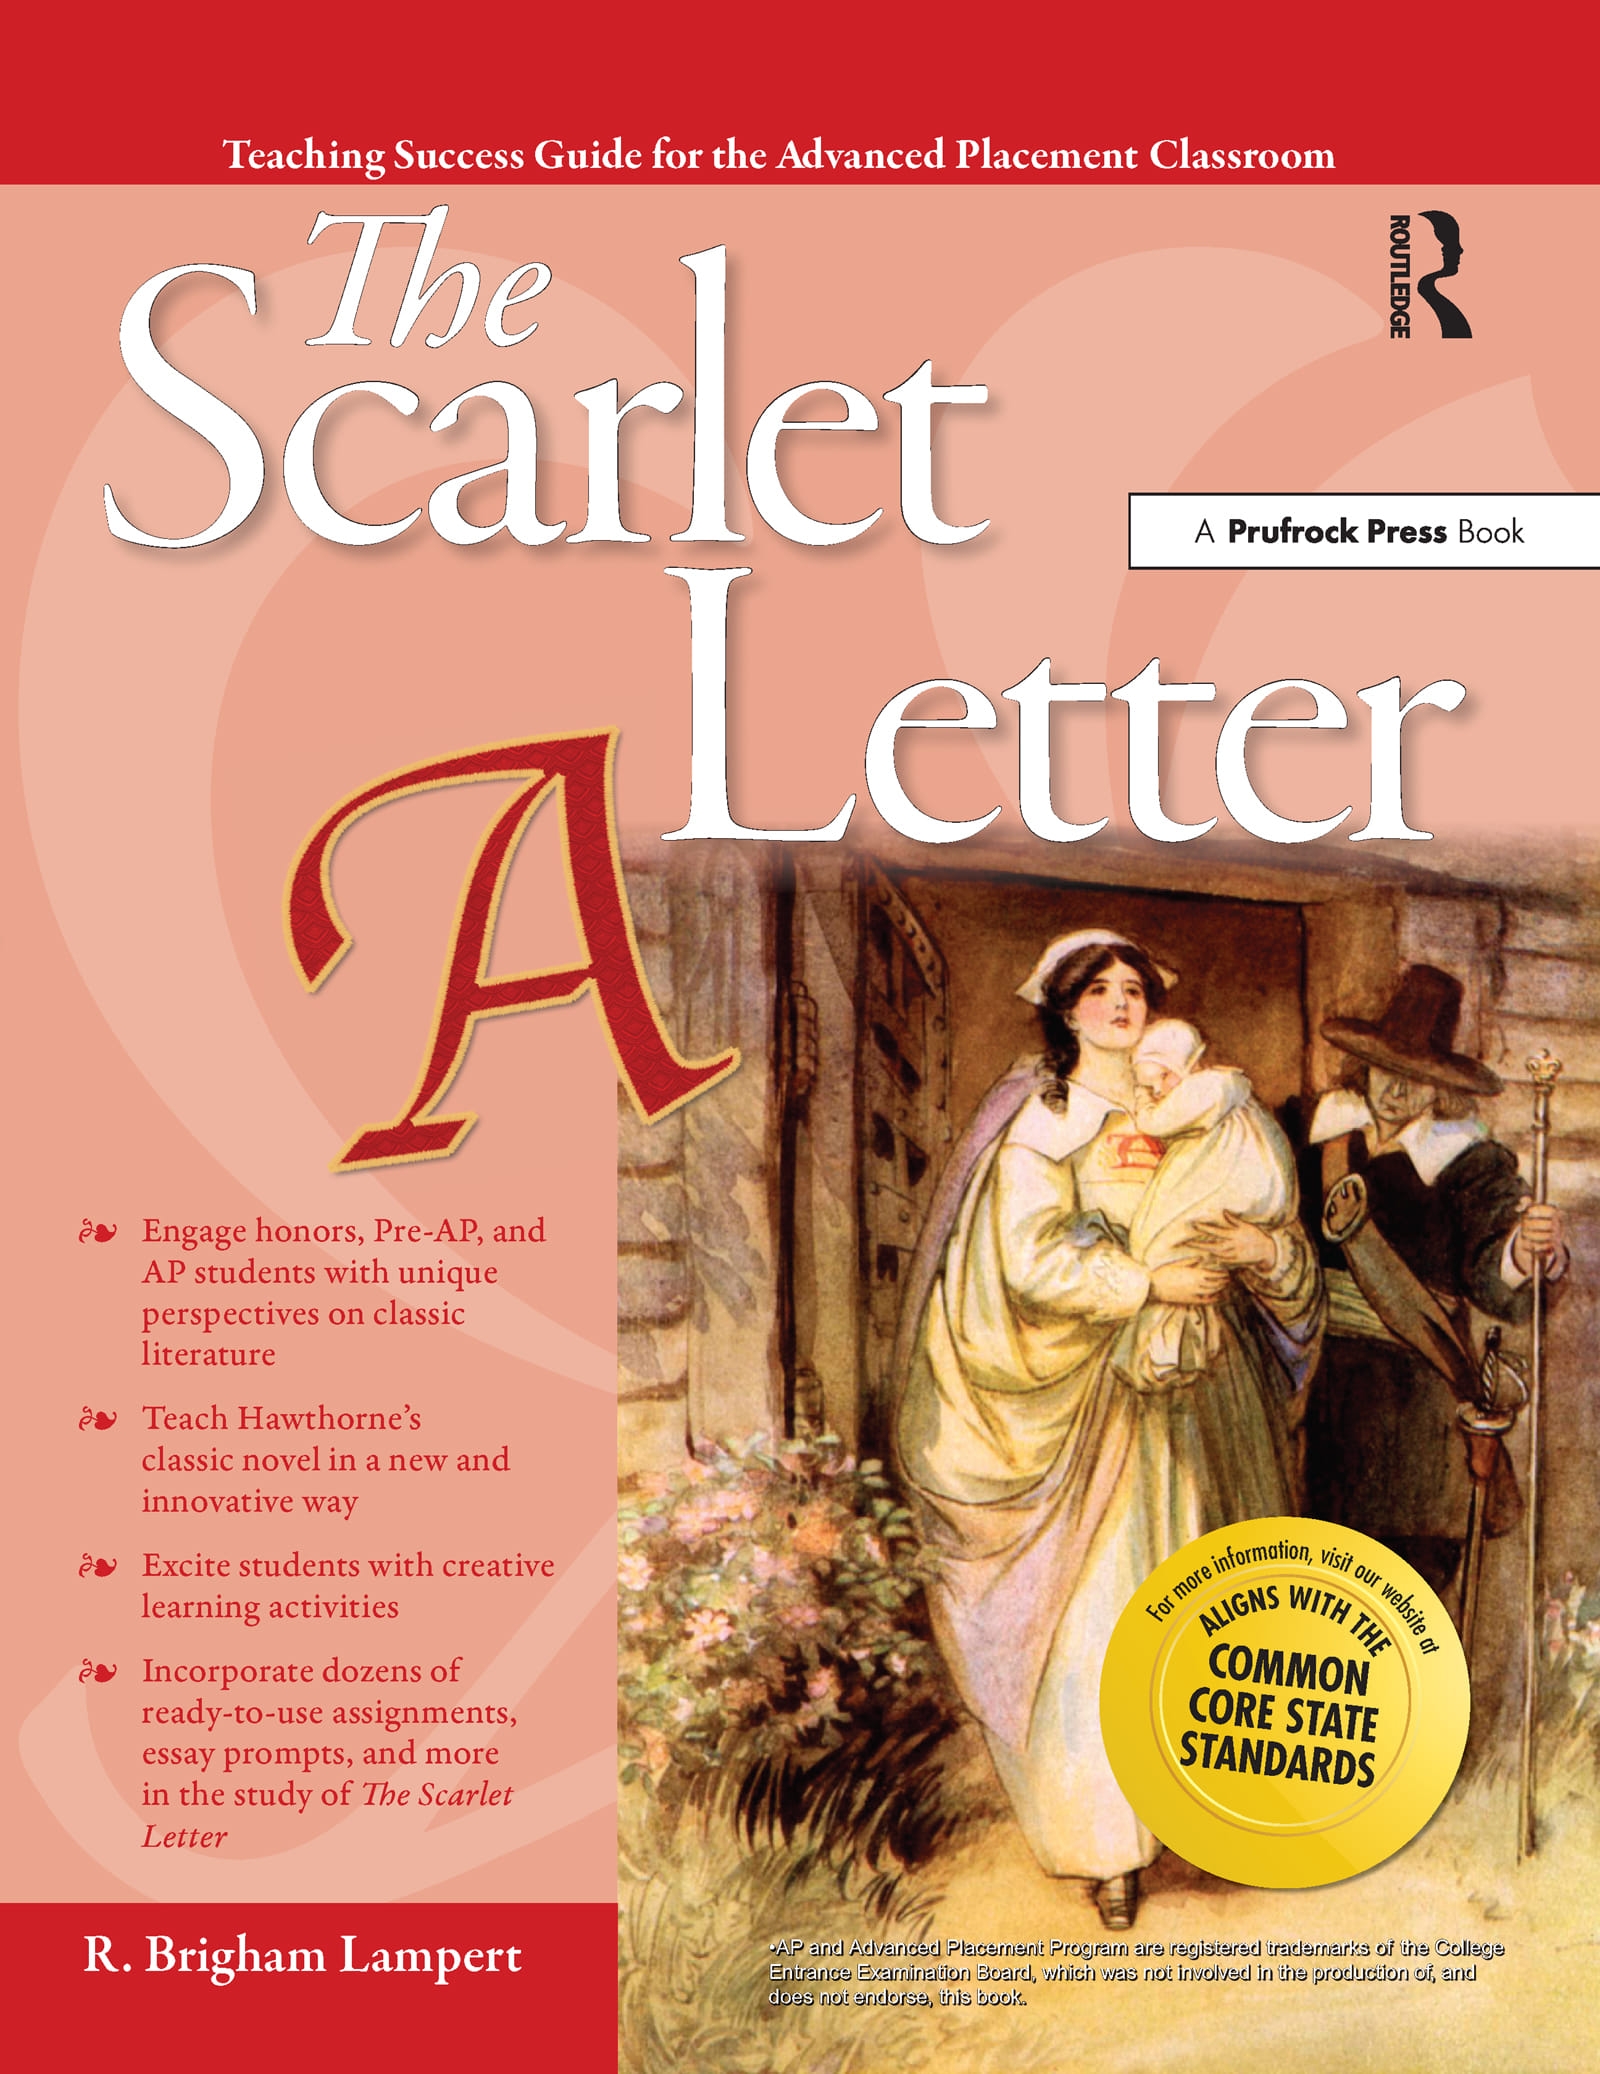 Advanced Placement Classroom: The Scarlet Letter